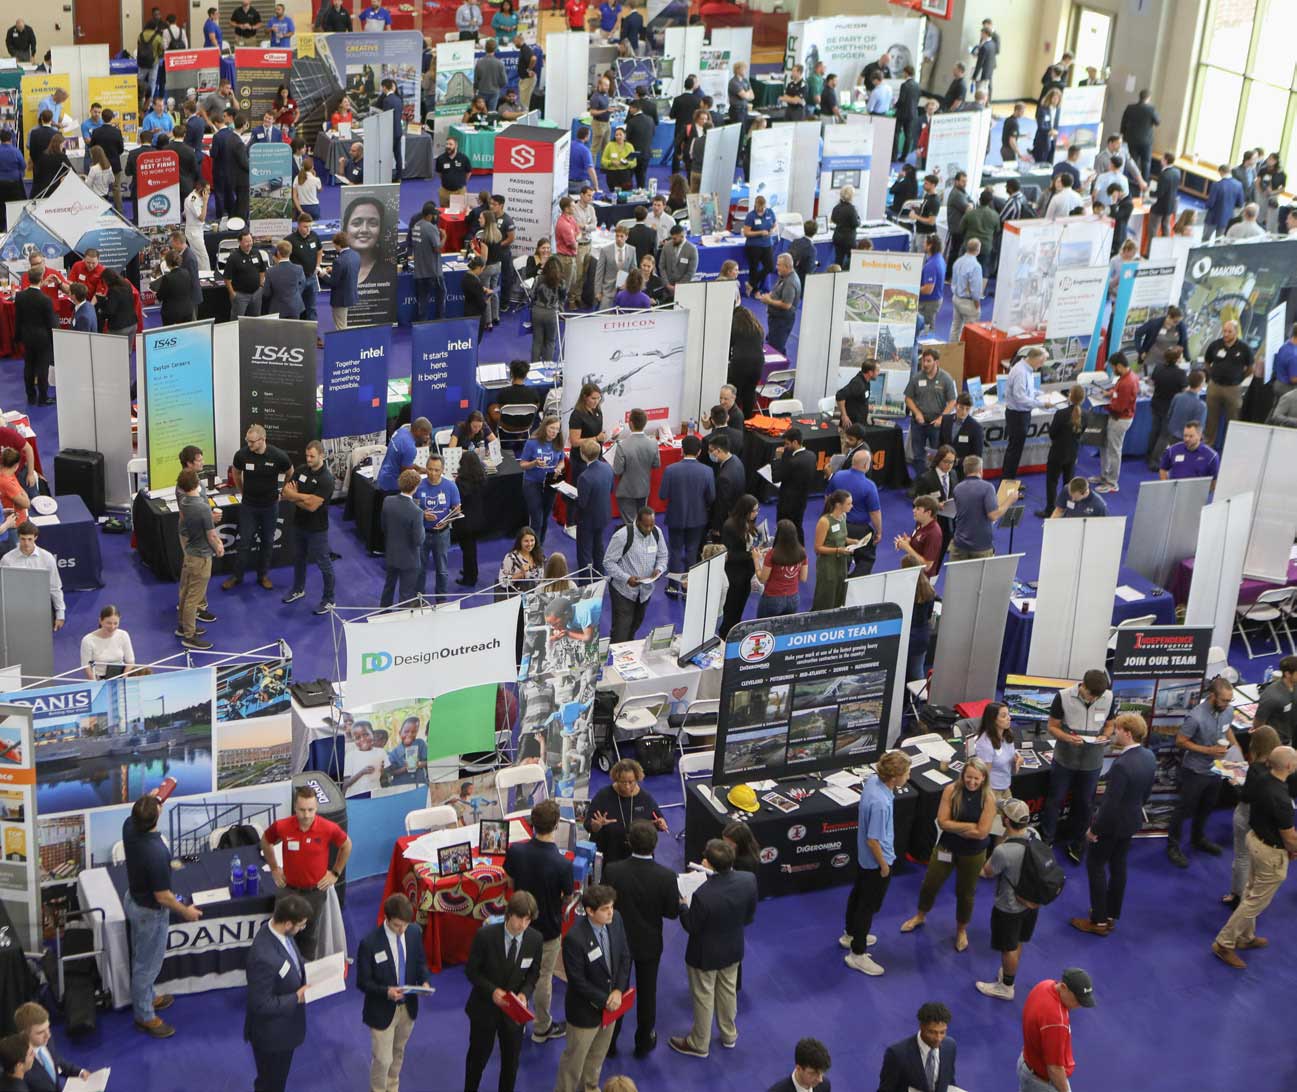 A career fair held at UD this fall.